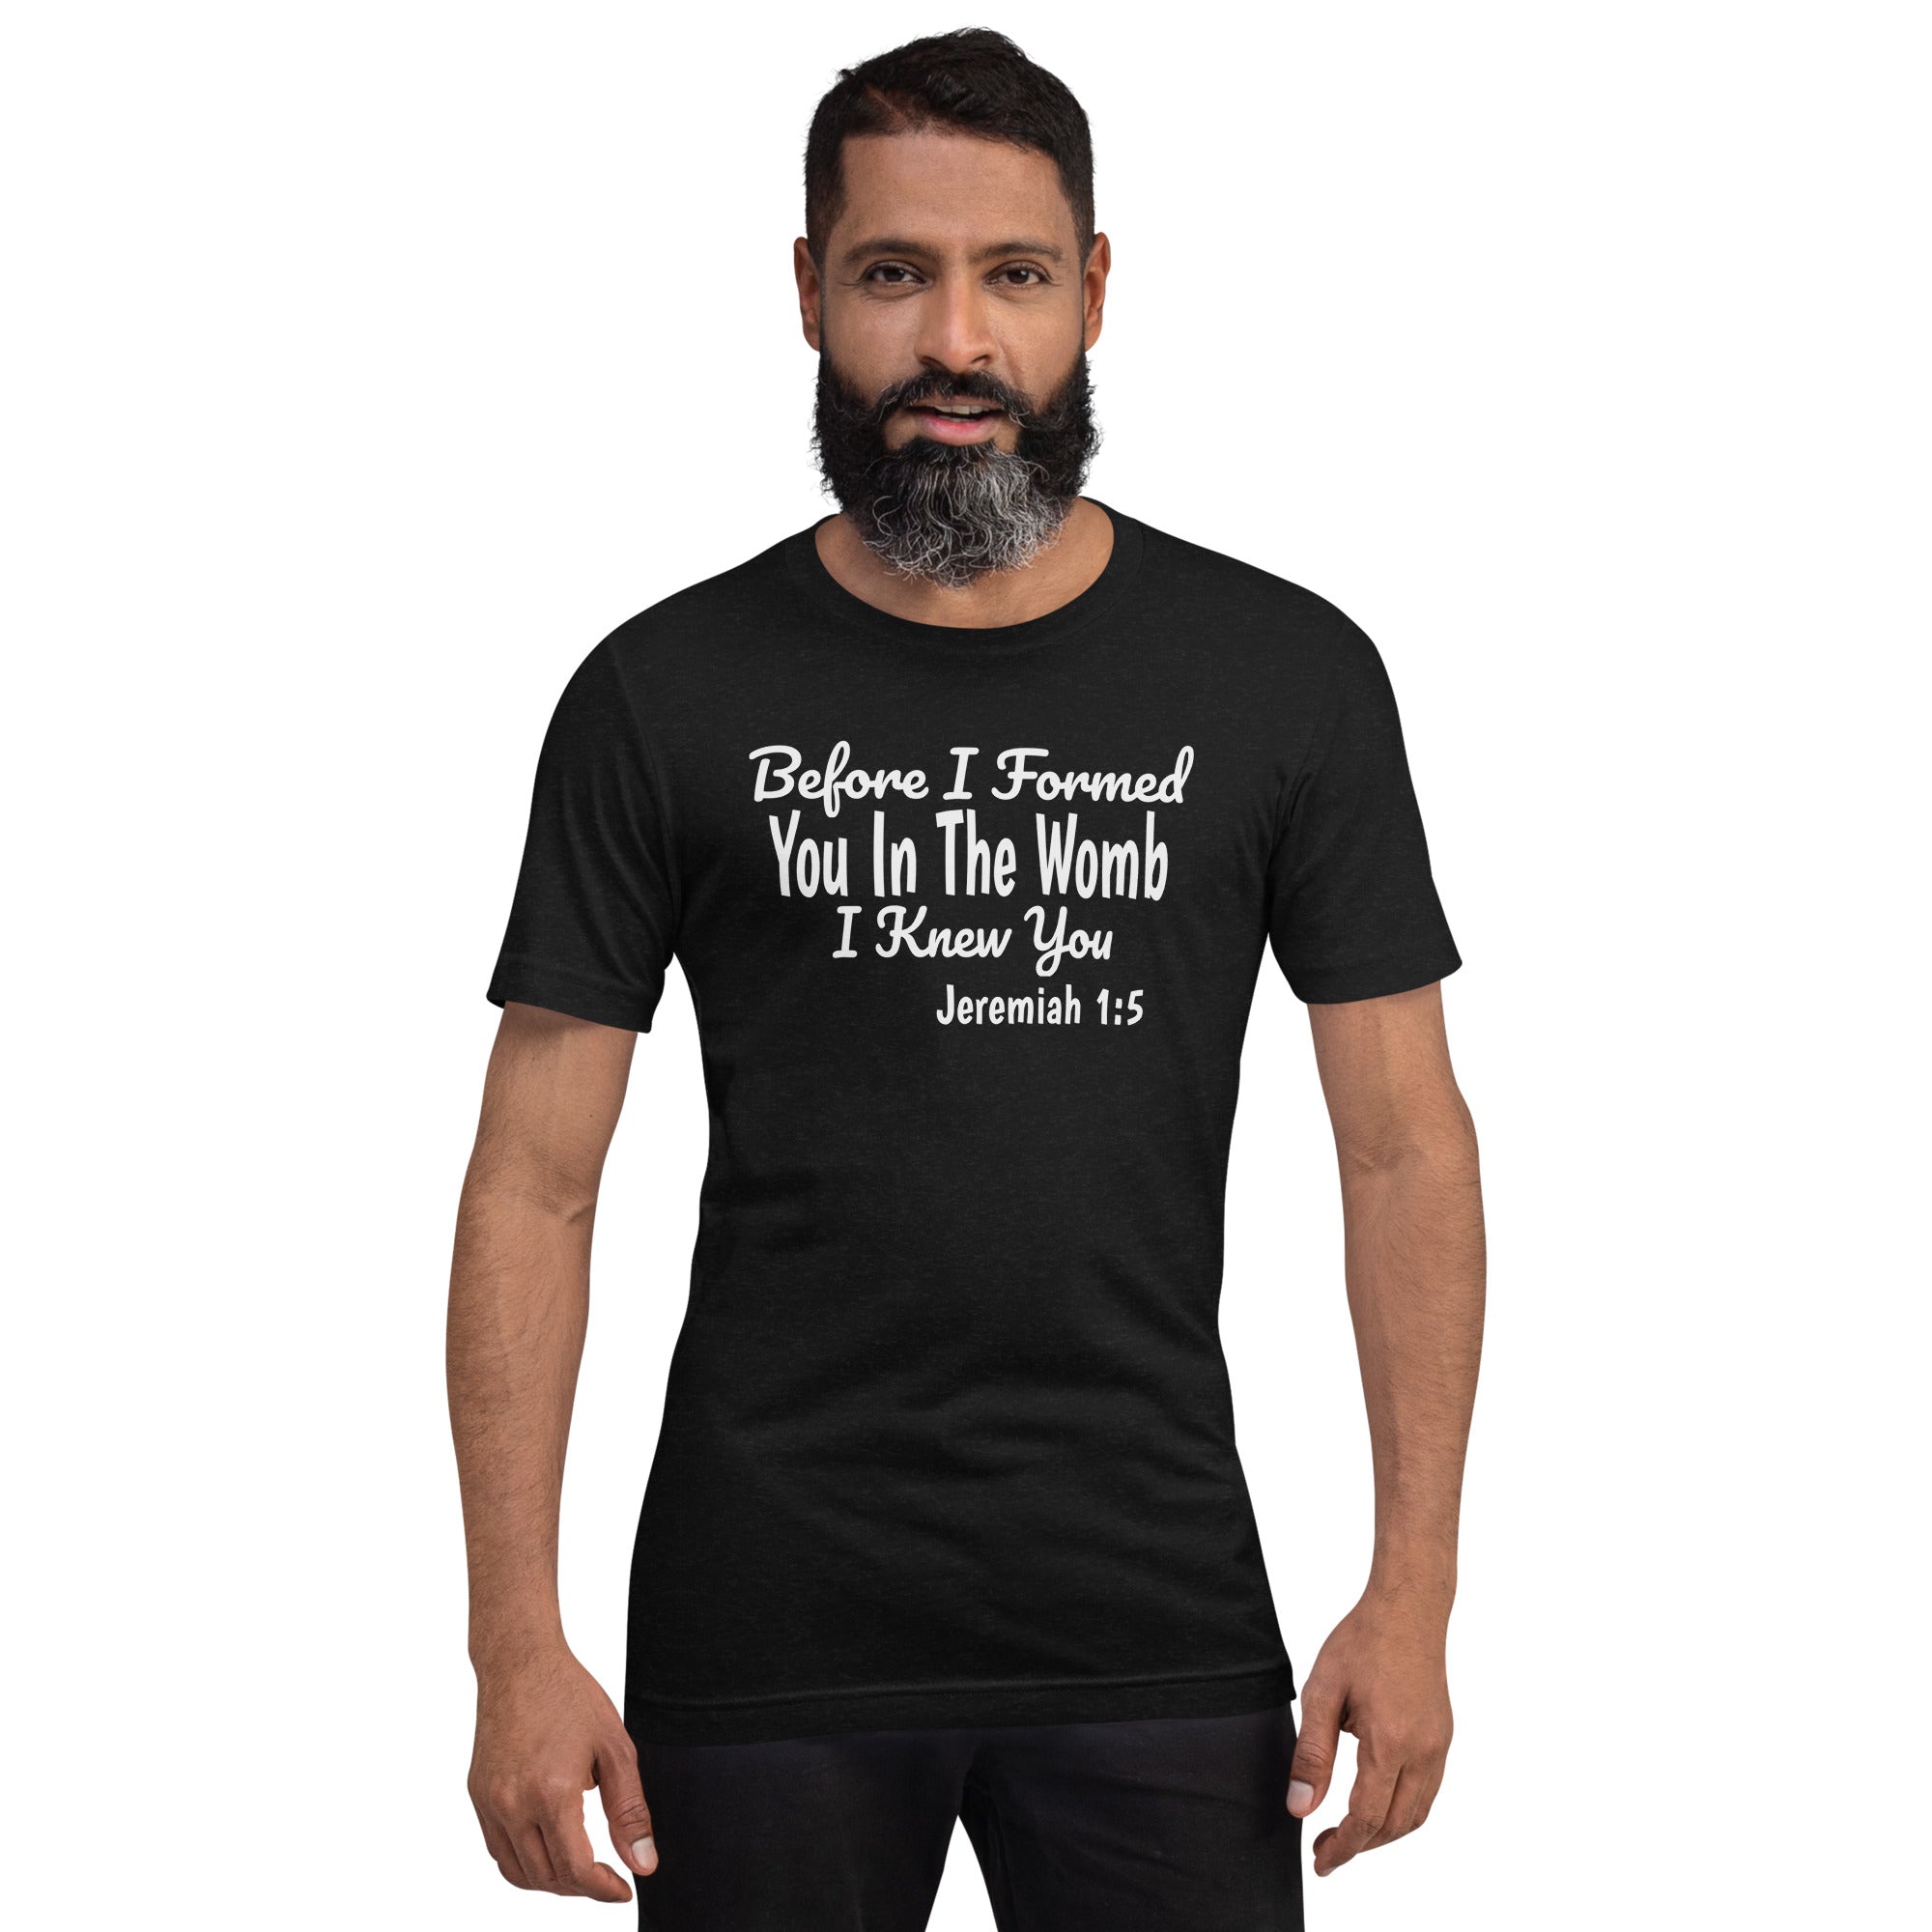 Pro Life T-Shirt Featuring Jeremiah 1:5 Bible Verse for Anti-Abortion, Choose Life People